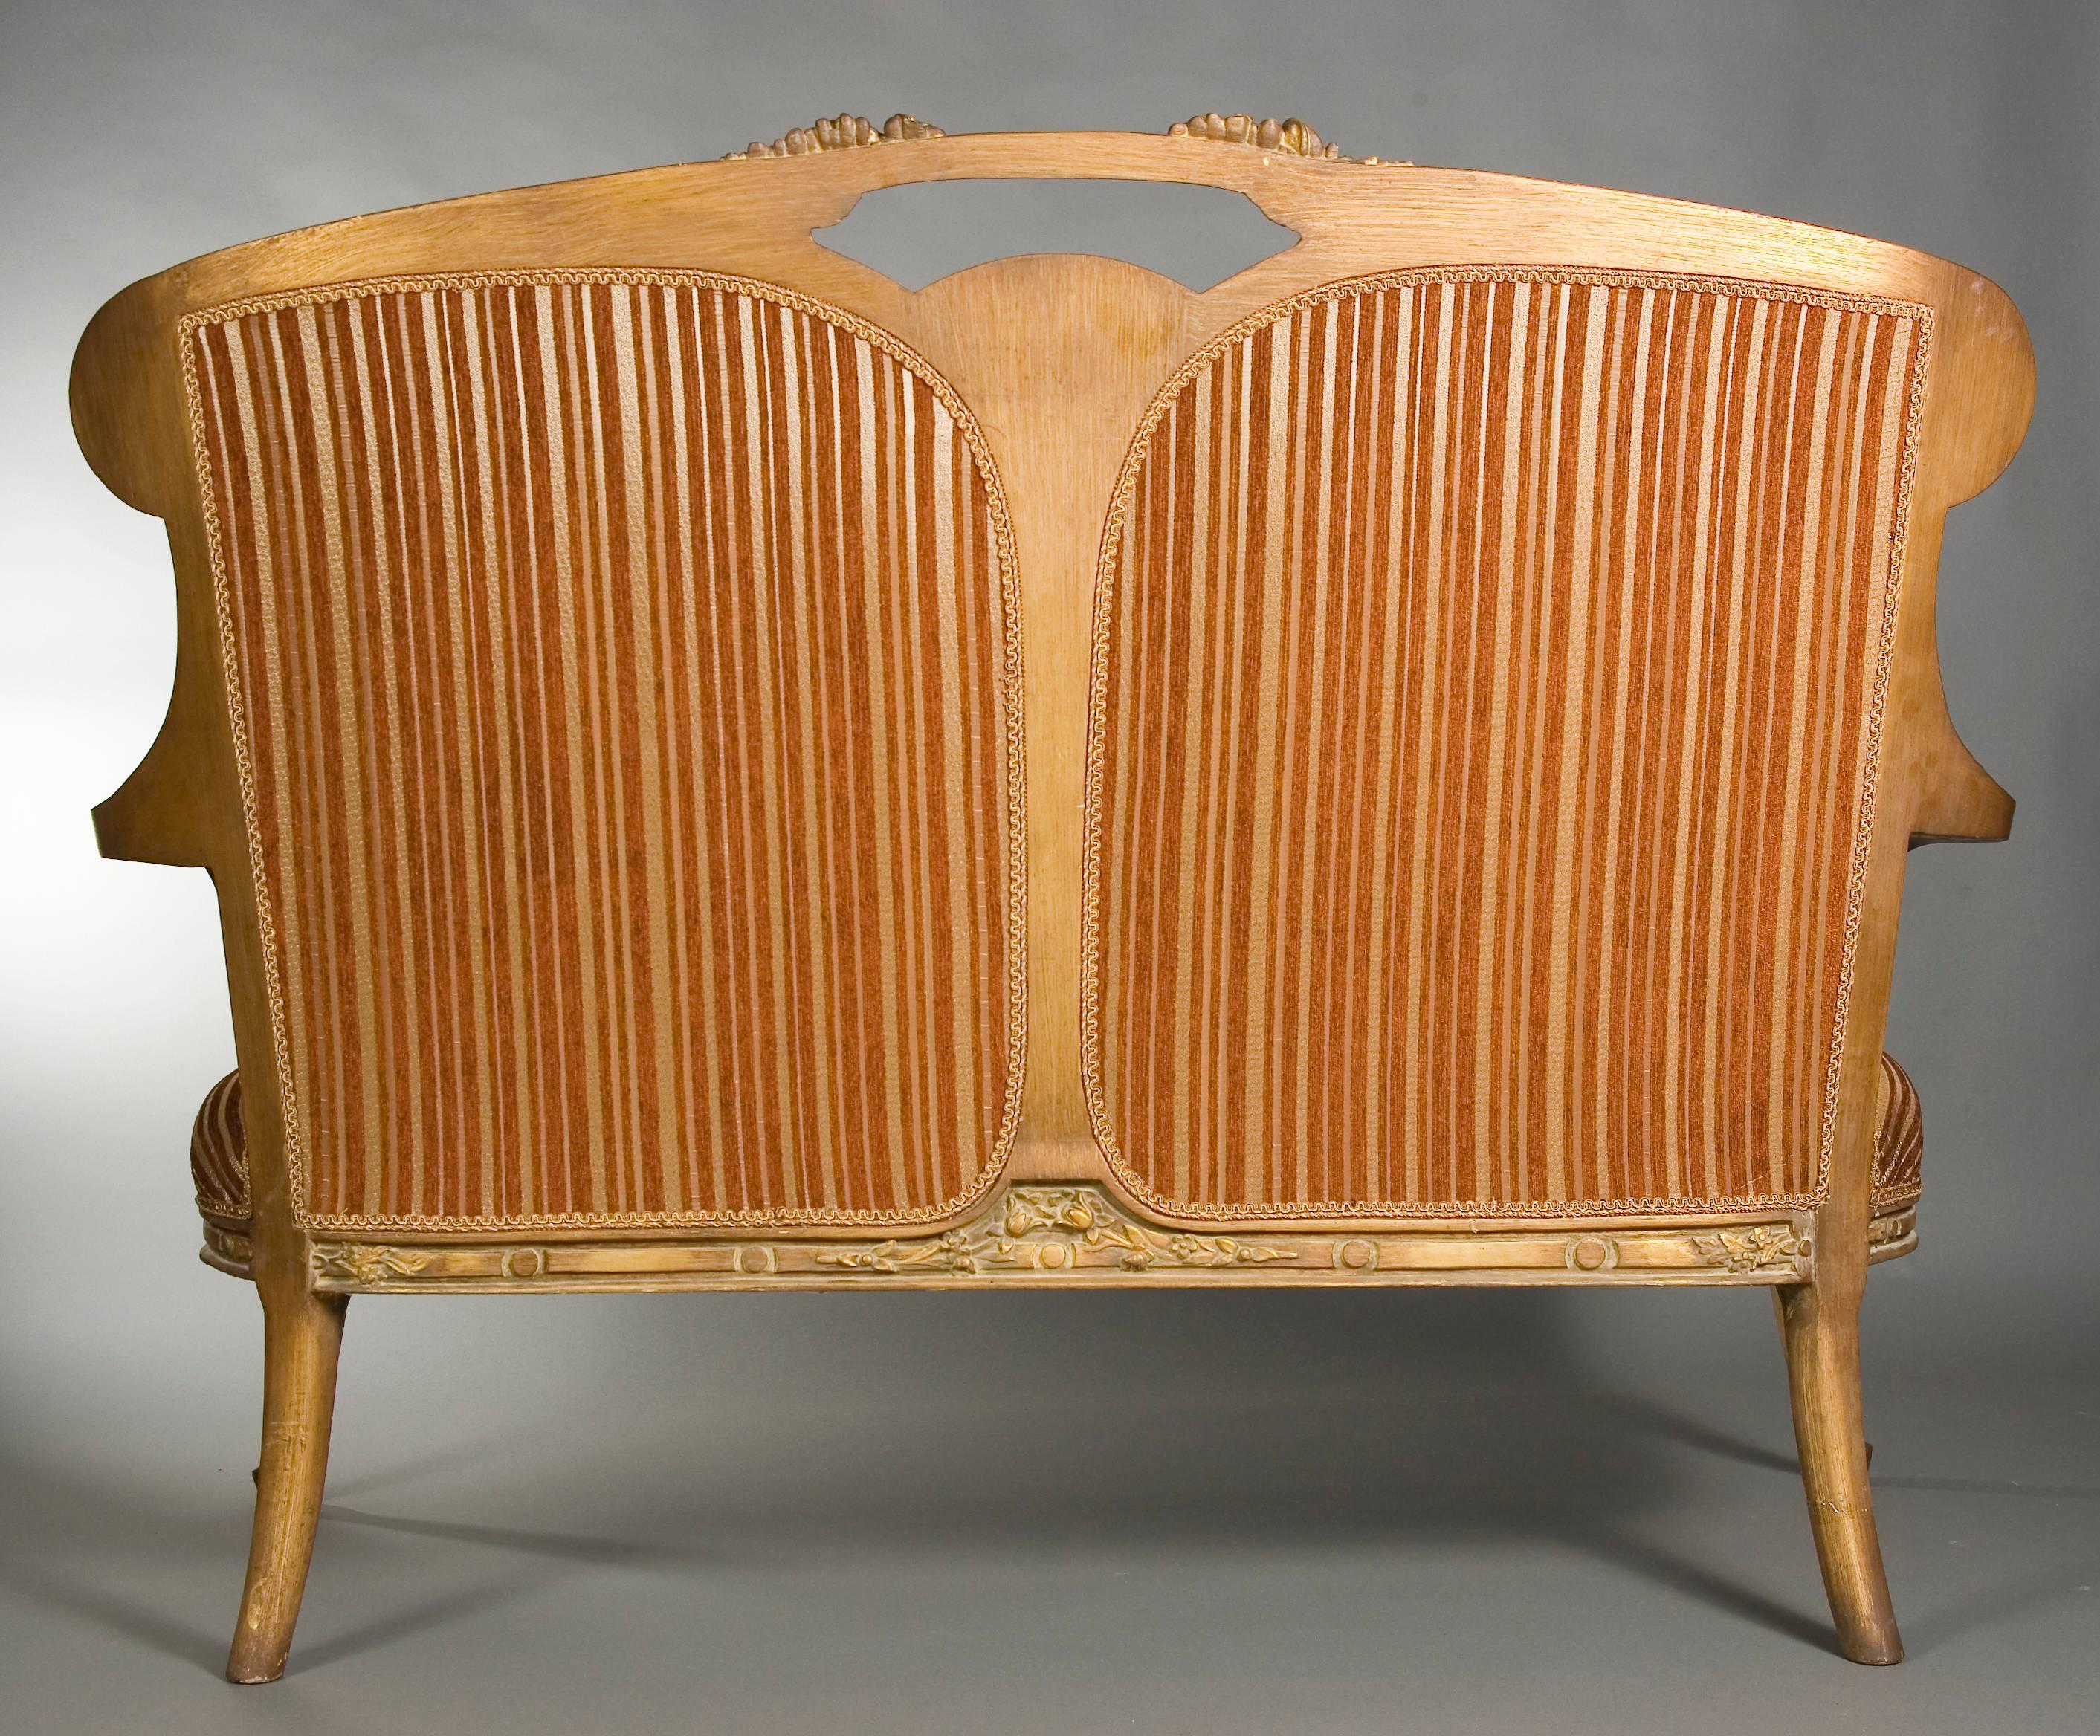 20th Century French Sofa in the Art Nouveau Style Beechwood (Französisch)